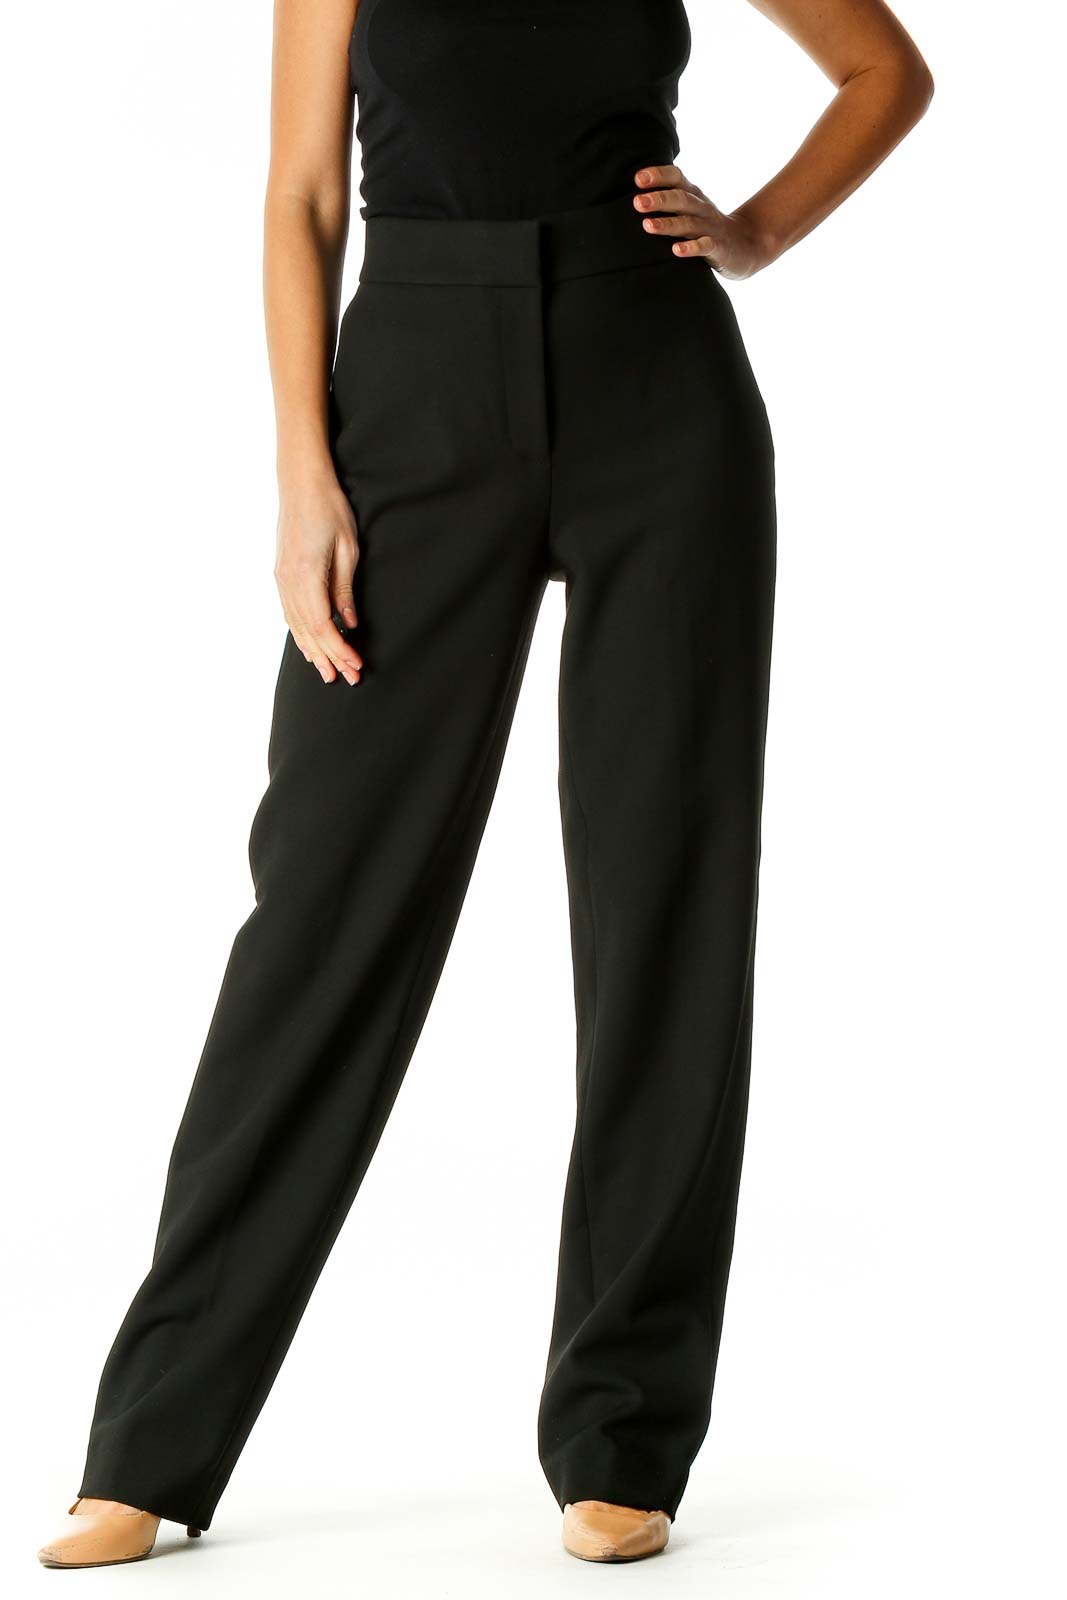 Express - Black Solid Classic Trousers Polyester Elastane Viscose